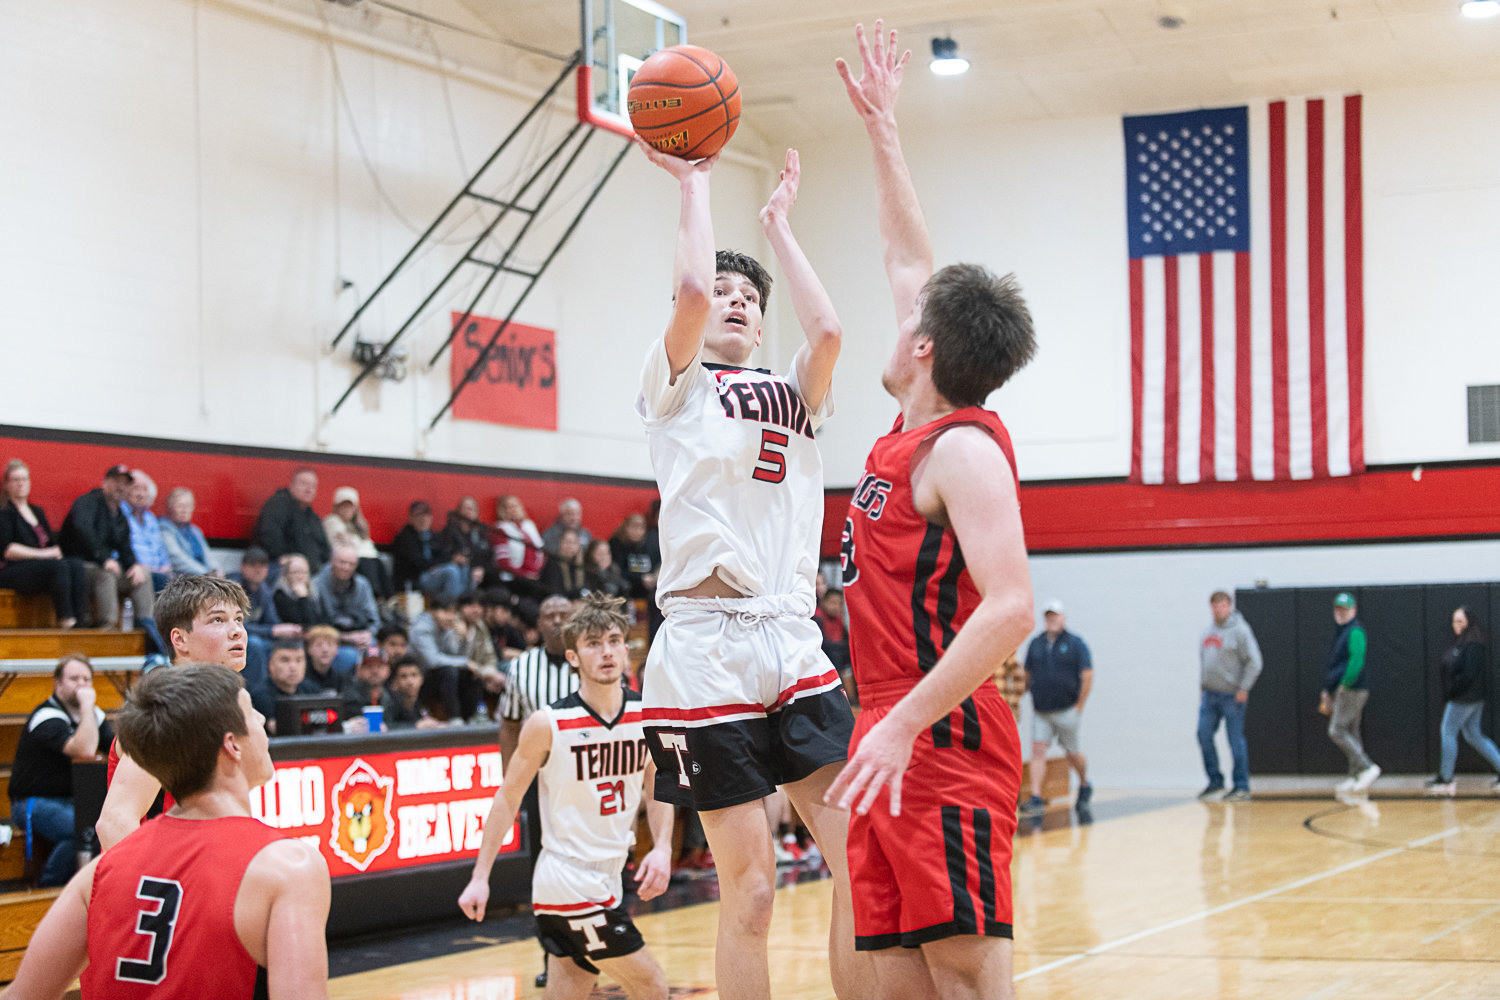 Noah Schow puts up a jumper during the second half of Tenino's 65-46 win over Mossyrock on Jan. 18.